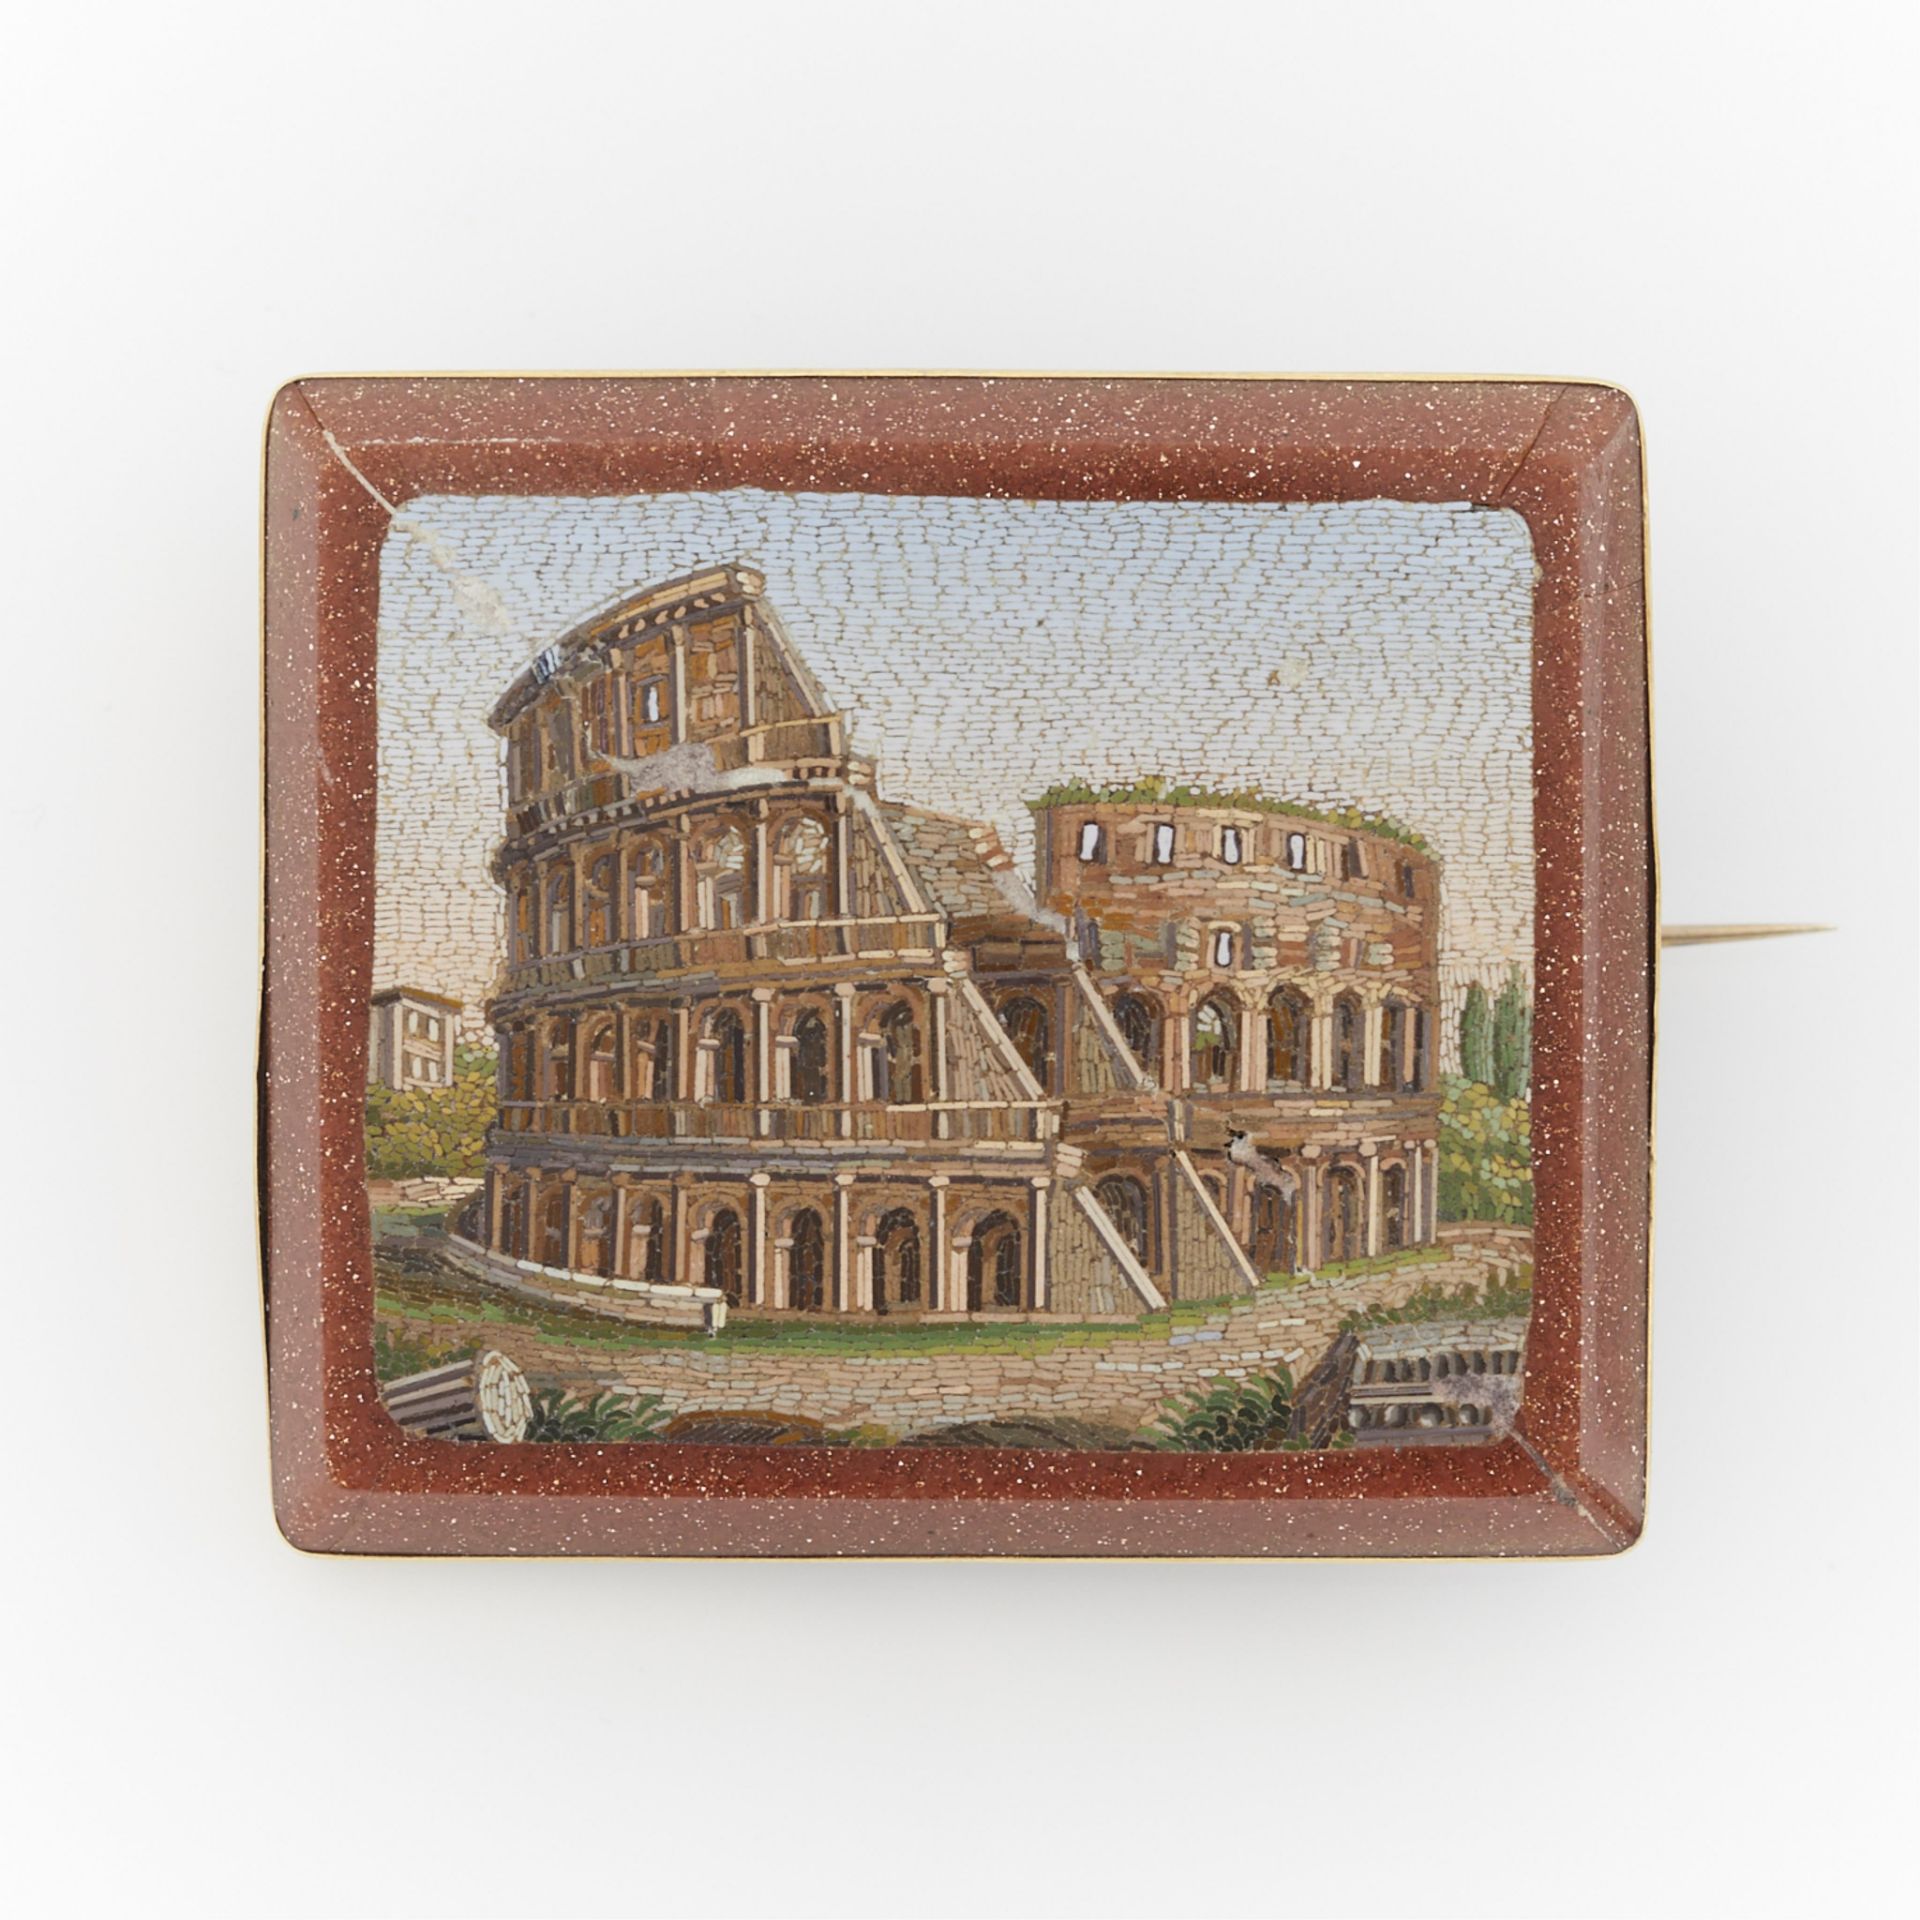 14k Grand Tour Micromosaic Brooch of the Colosseum